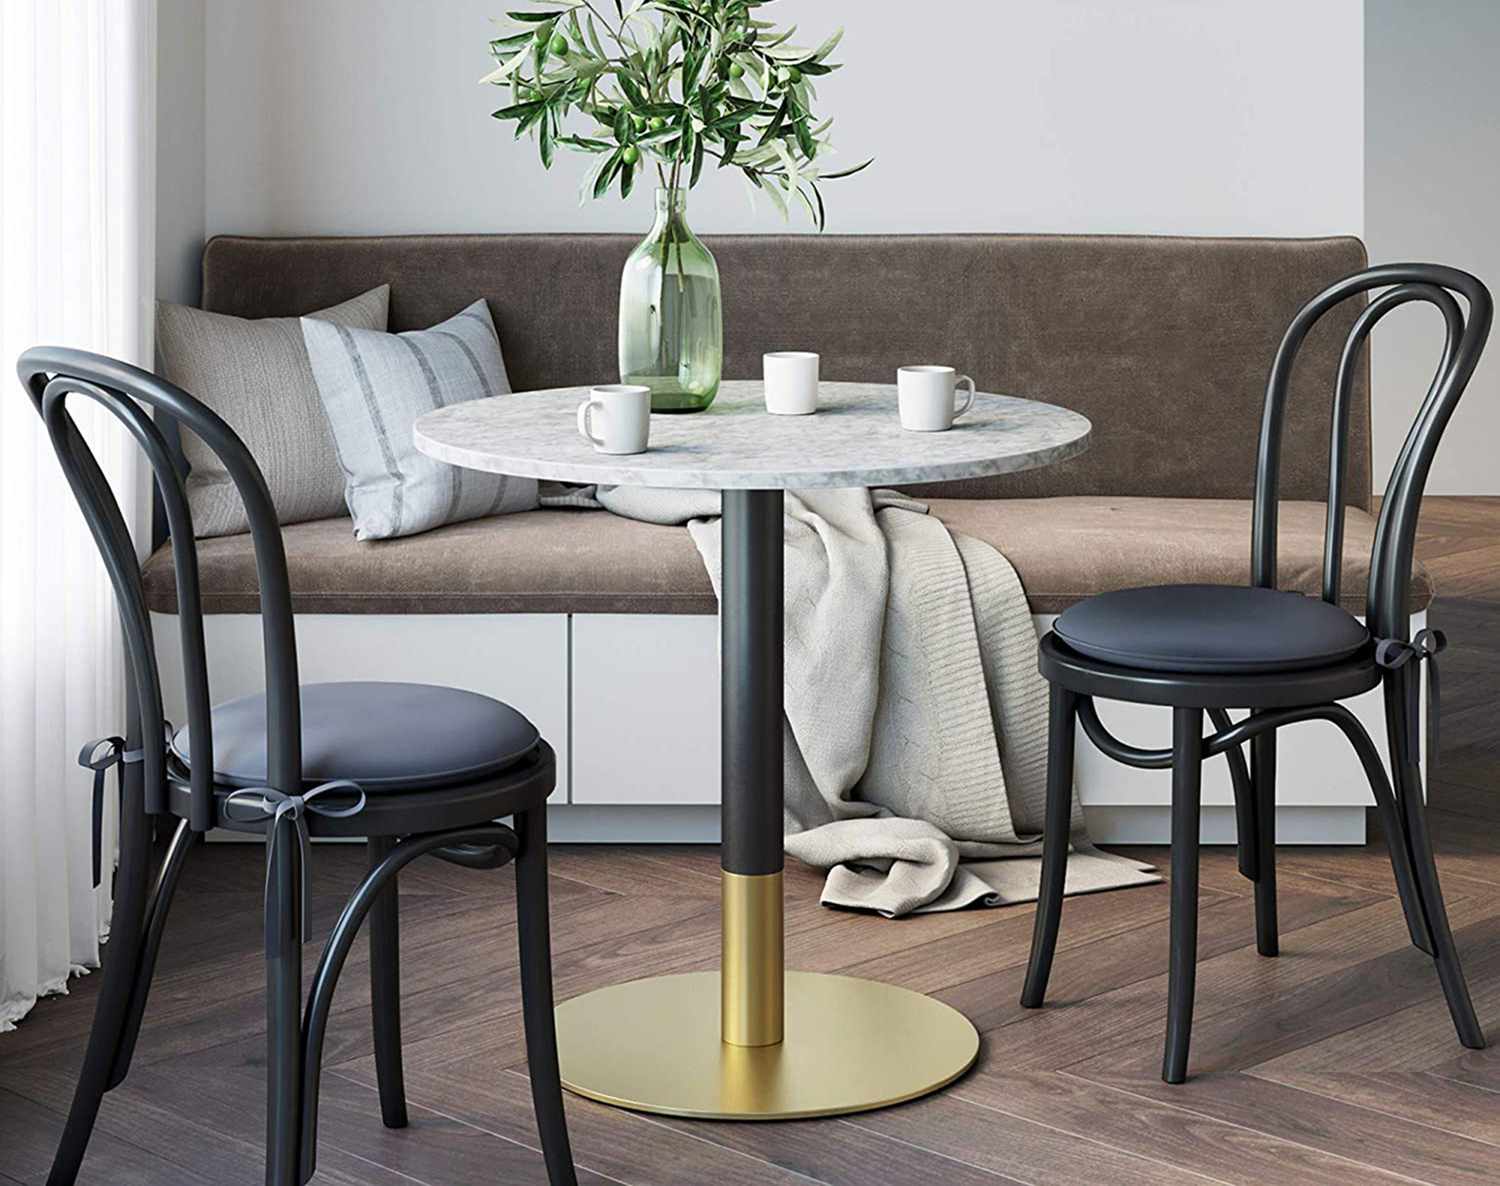 8 Best Dining Tables For Small Spaces, Wayfair Com Dining Room Set